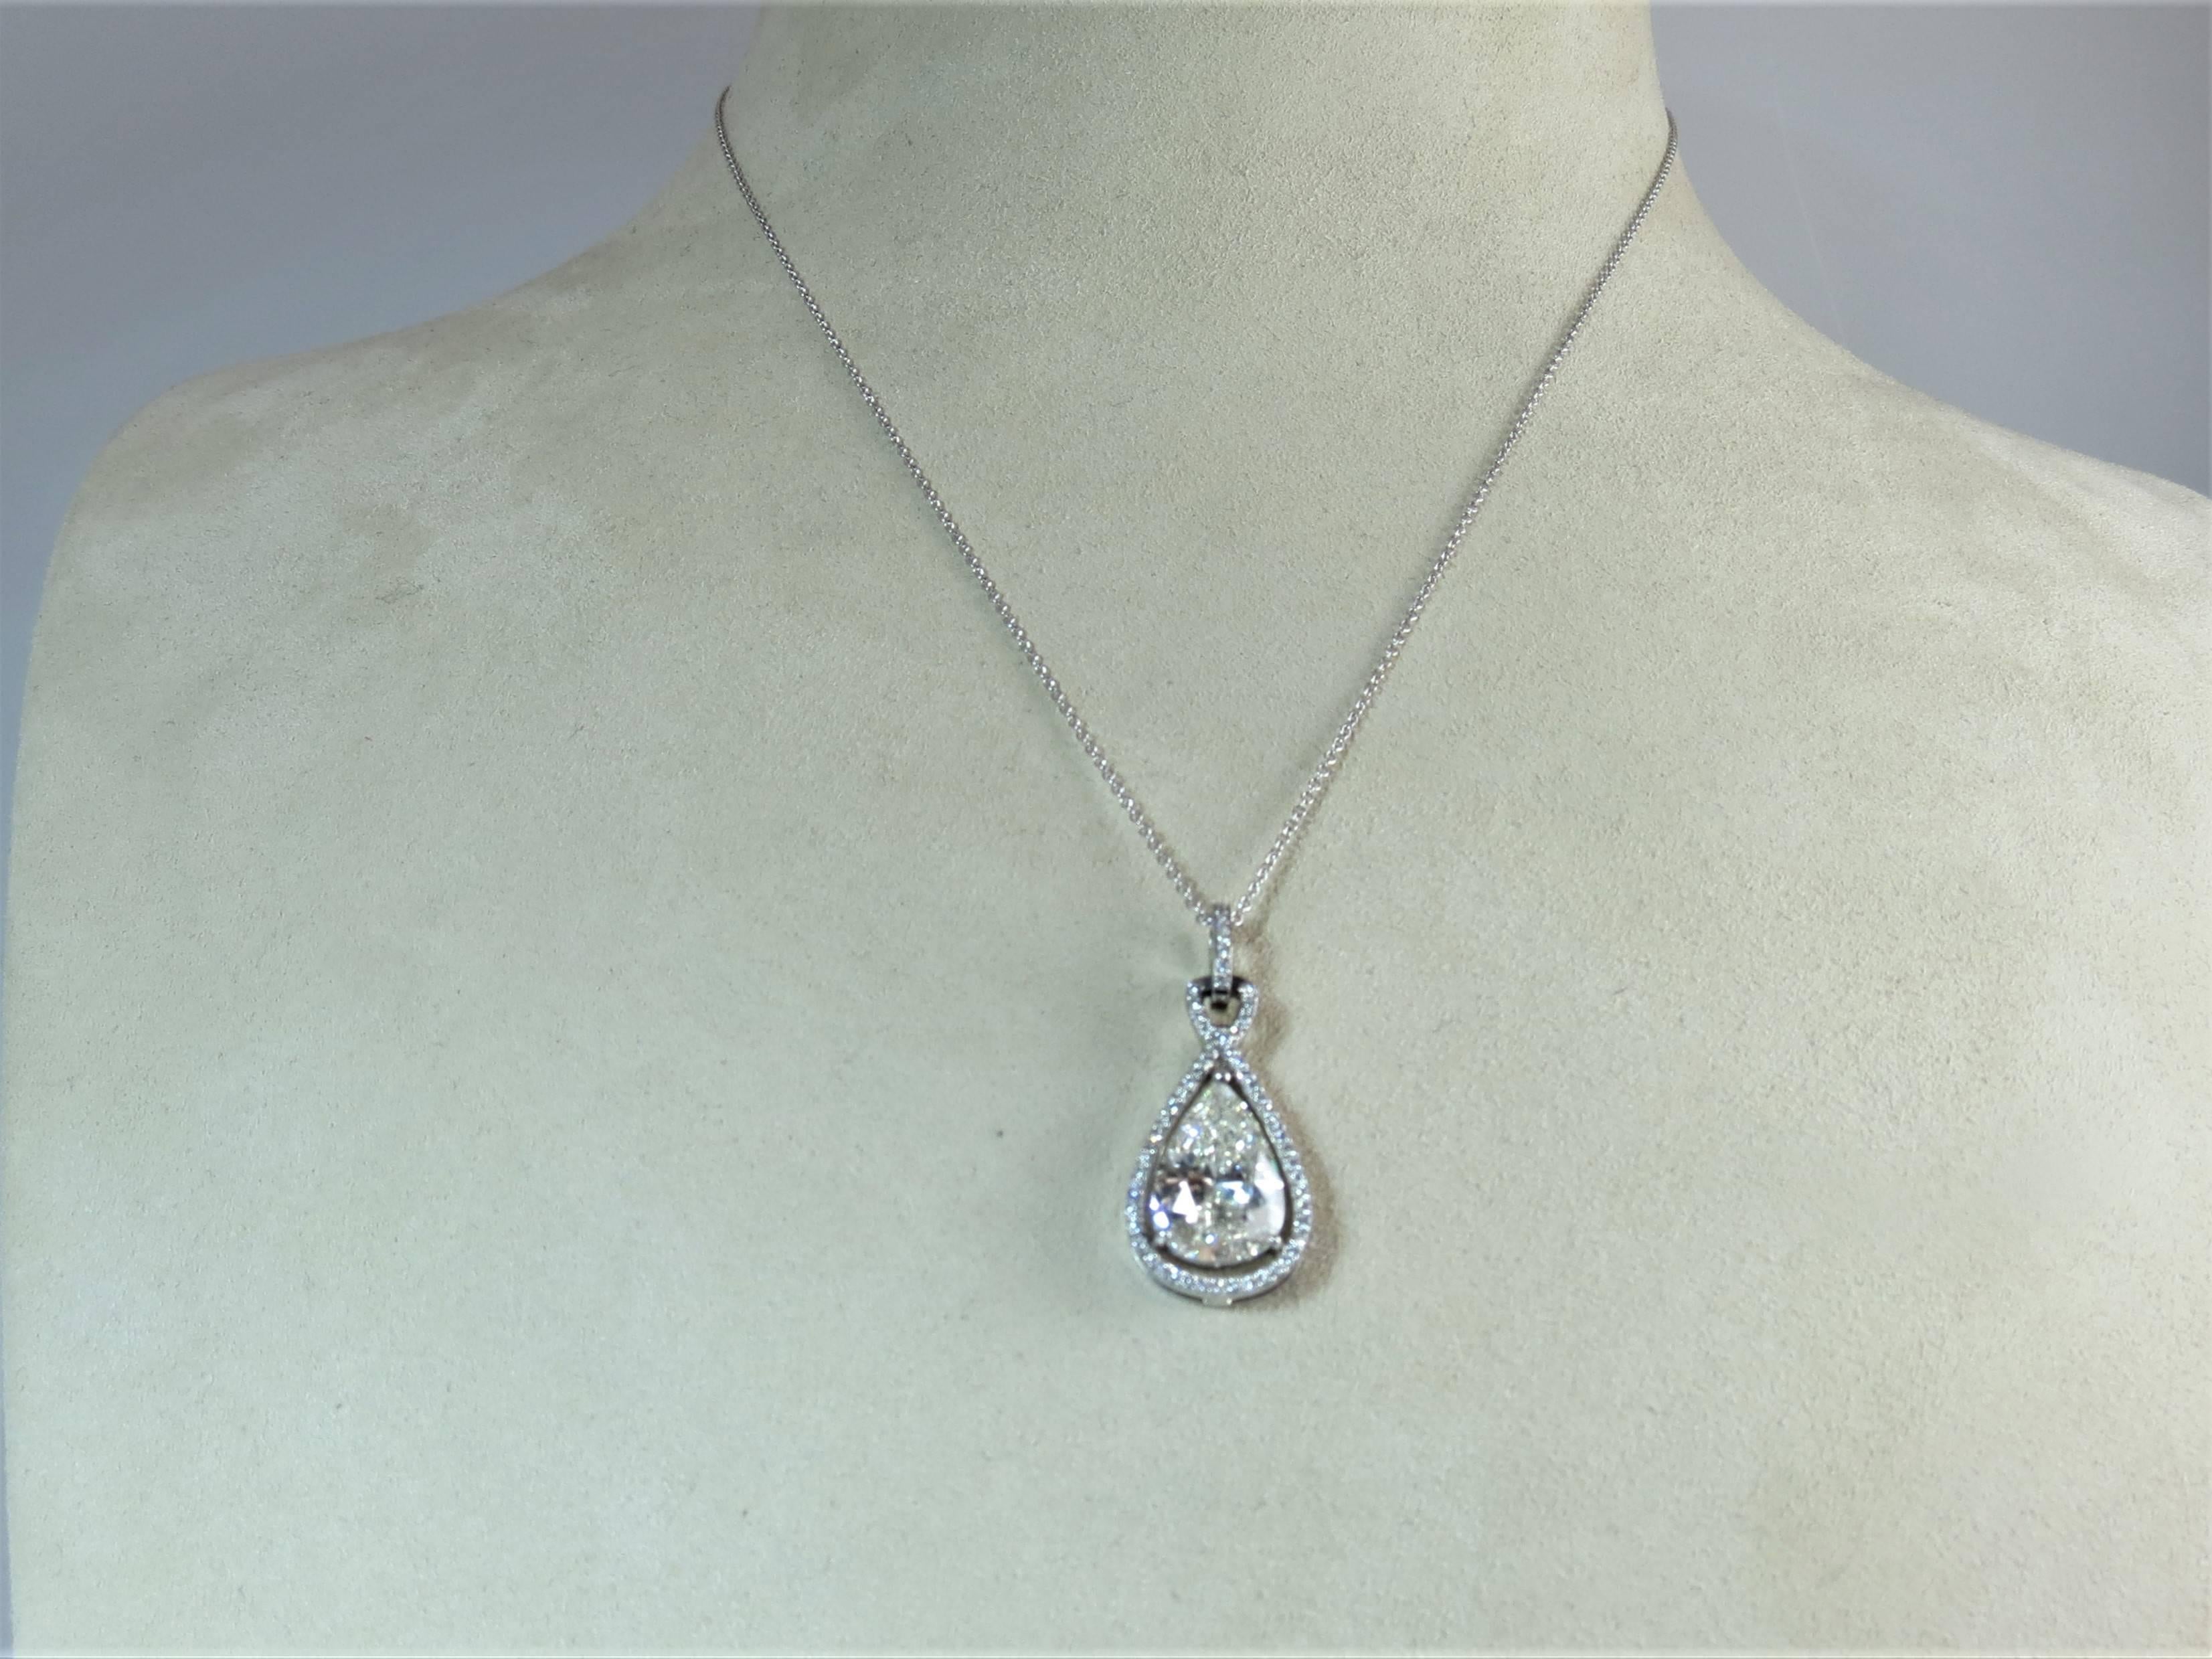 Bez Ambar platinum diamond pendant mounting with 61 full cut round diamonds weighing .21cts, set in center with 3.07 pear shape diamond, GIA certified, J color, VS2 clarity, suspended from 18 inch white gold chain.
Pear shape diamond may be sold